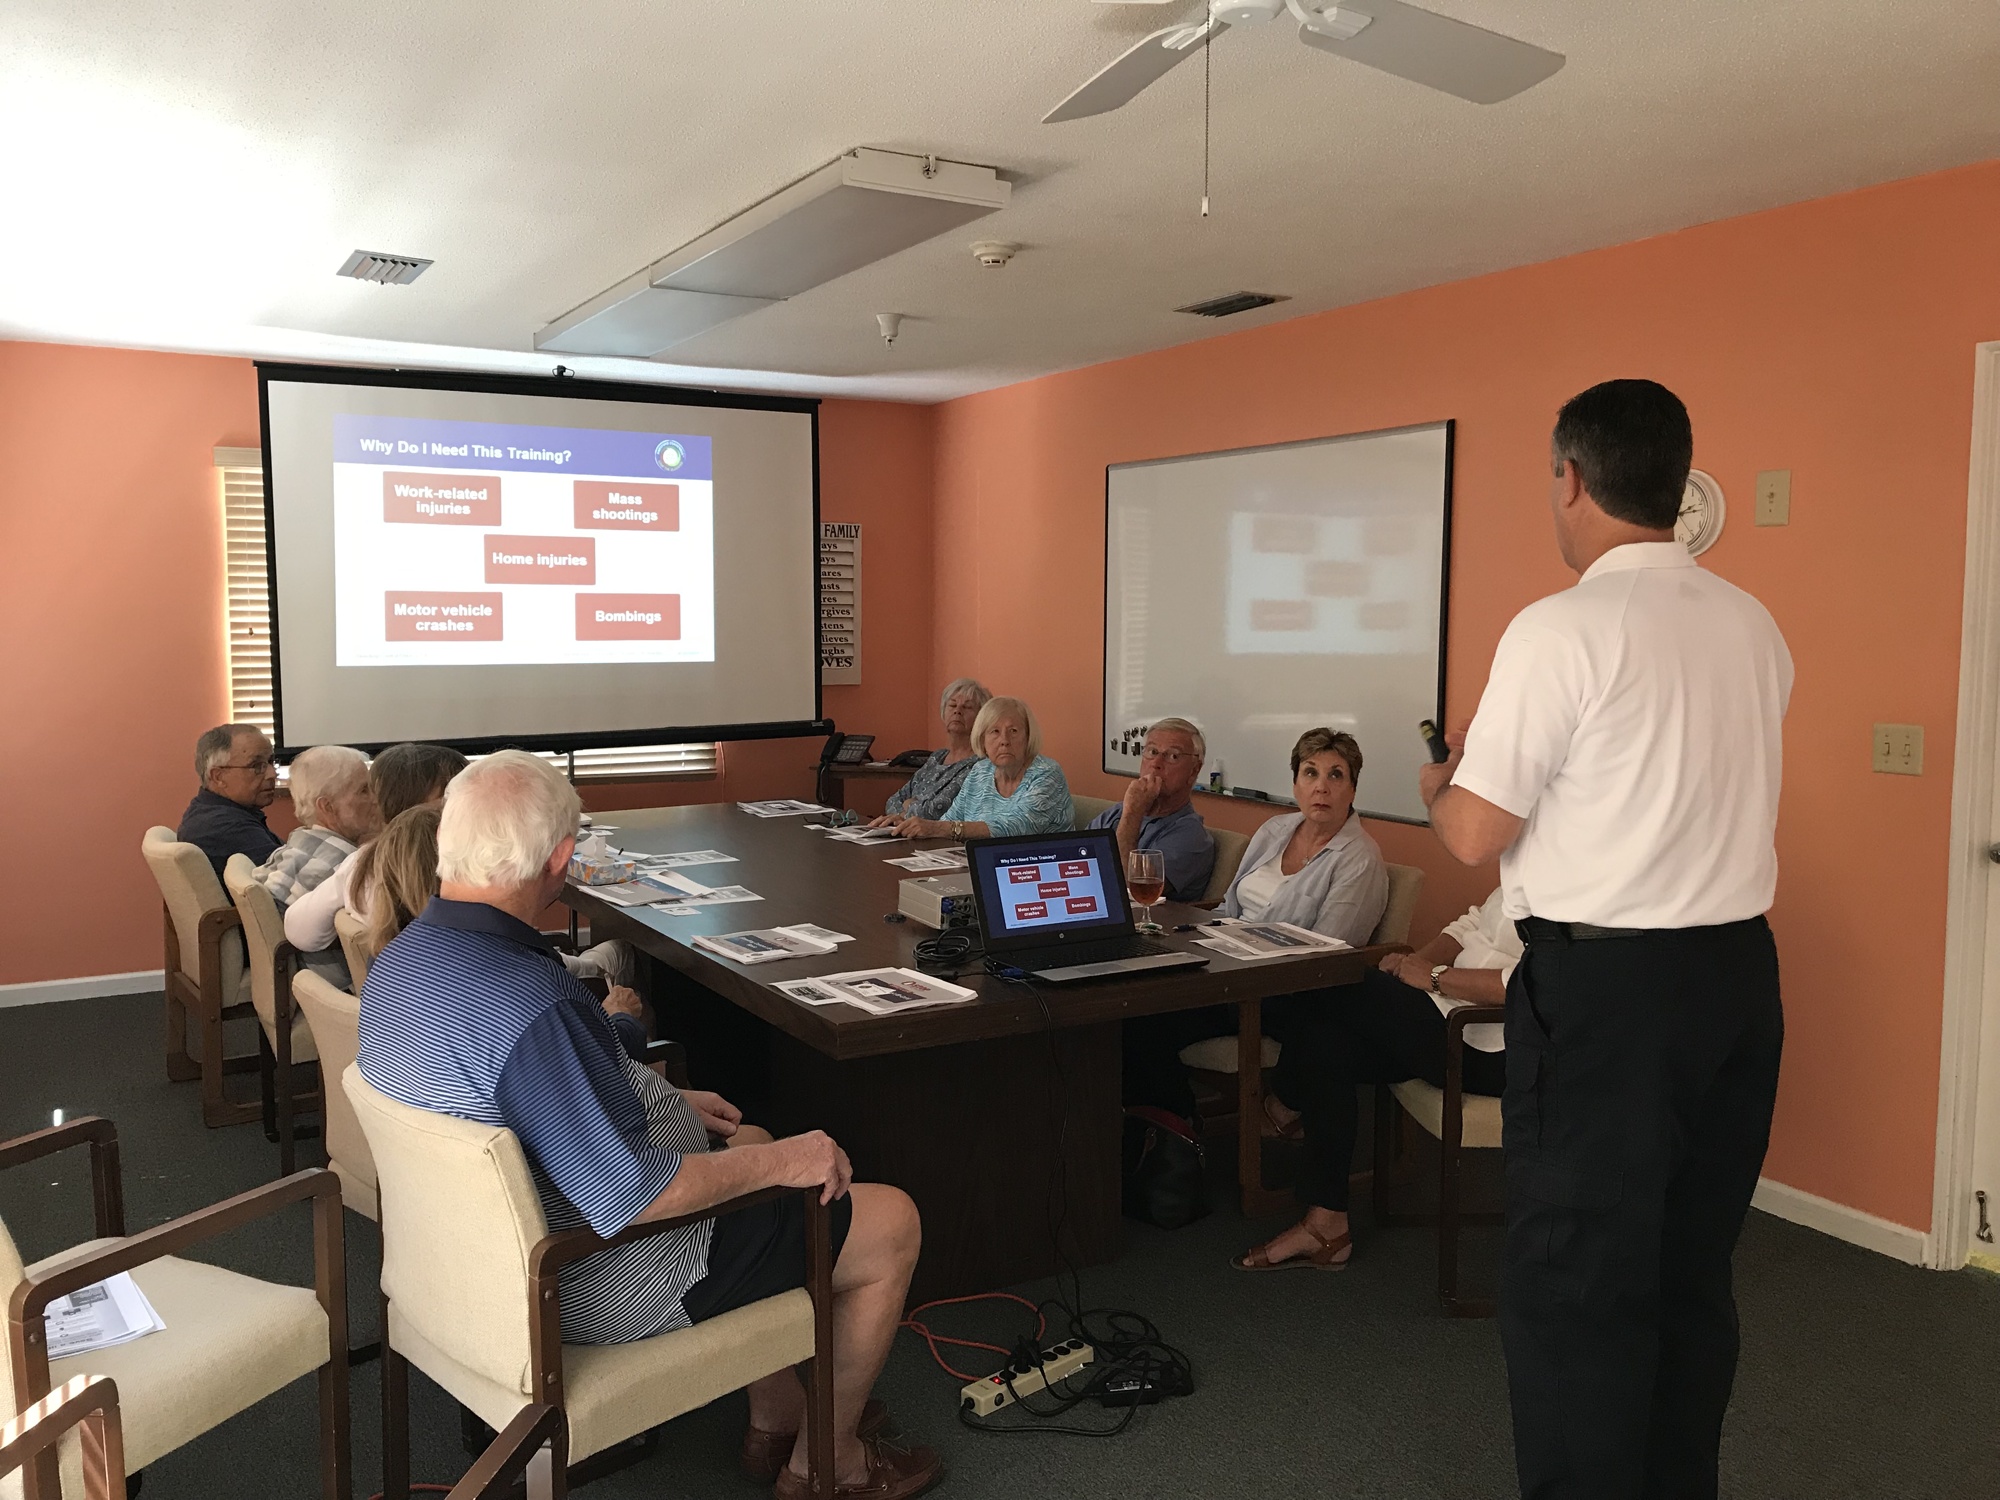 A Longboat Key Fire Rescue Department member gives a presentation on controlled bleeding at a Stop the Bleed training session. (Photo courtesy of Longboat Key Fire Rescue Department)